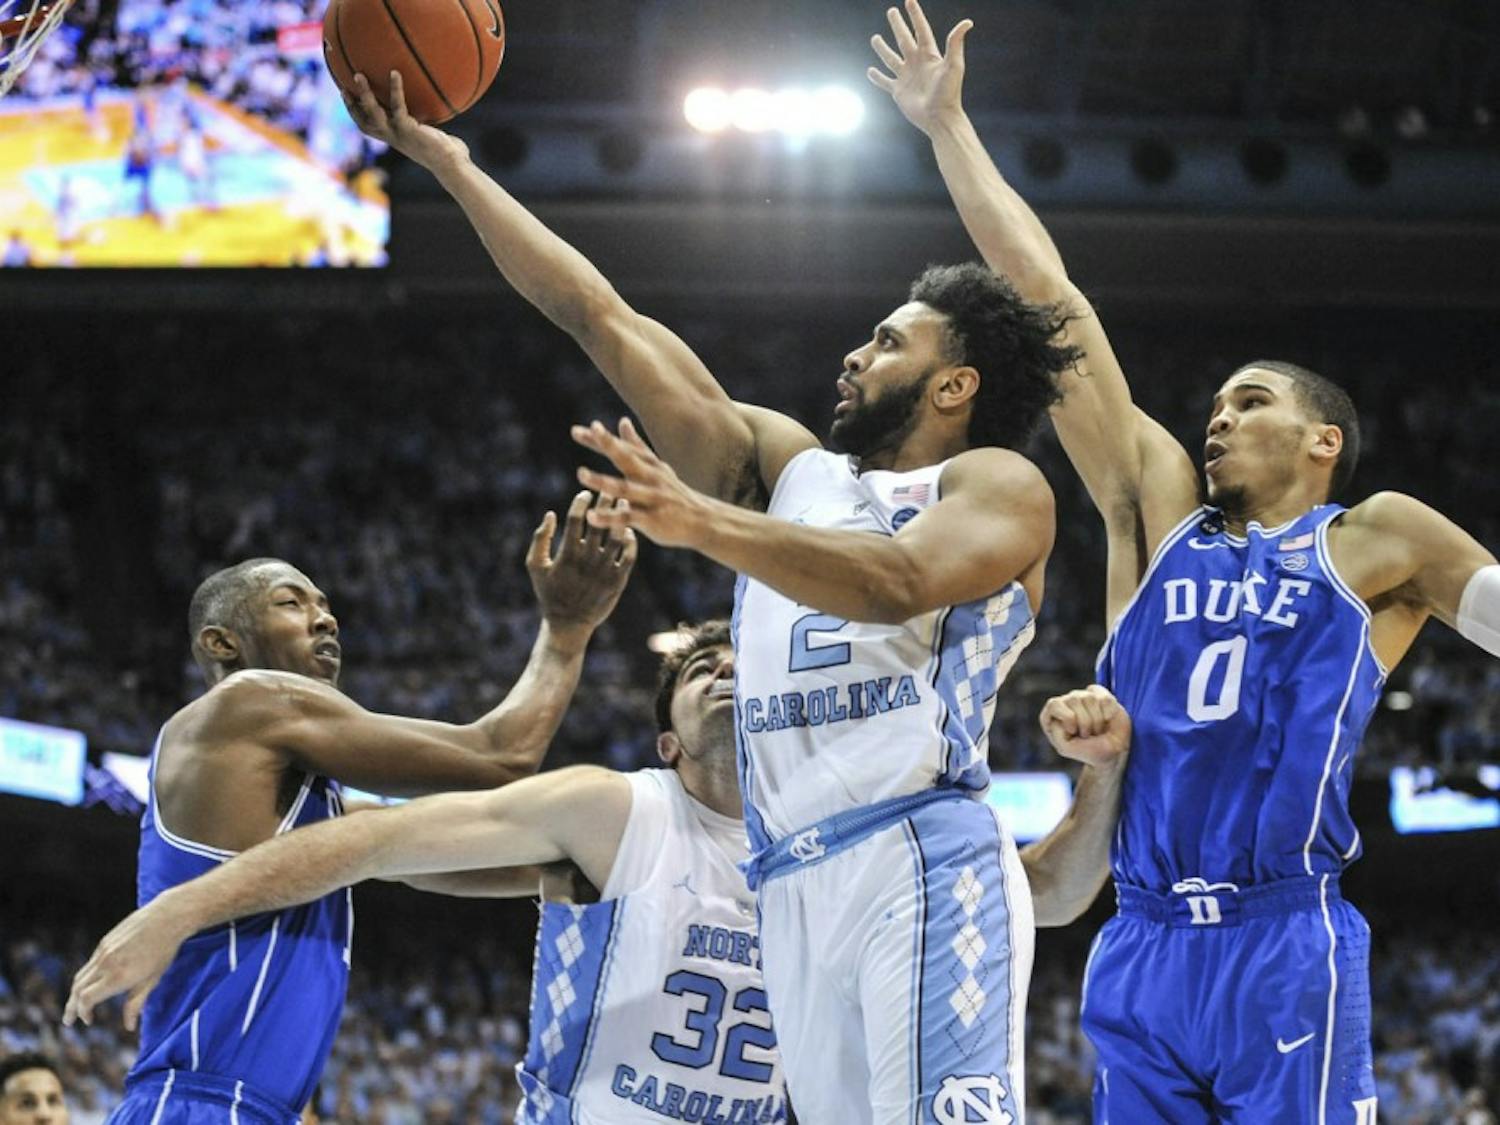 North Carolina guard Joel Berry (2) goes up for a shot in No. 5 UNC’s 90-83 win over No. 17 Duke on March 4th in the Smith Center. Berry finished with a team-high 28 points and five made 3-pointers.